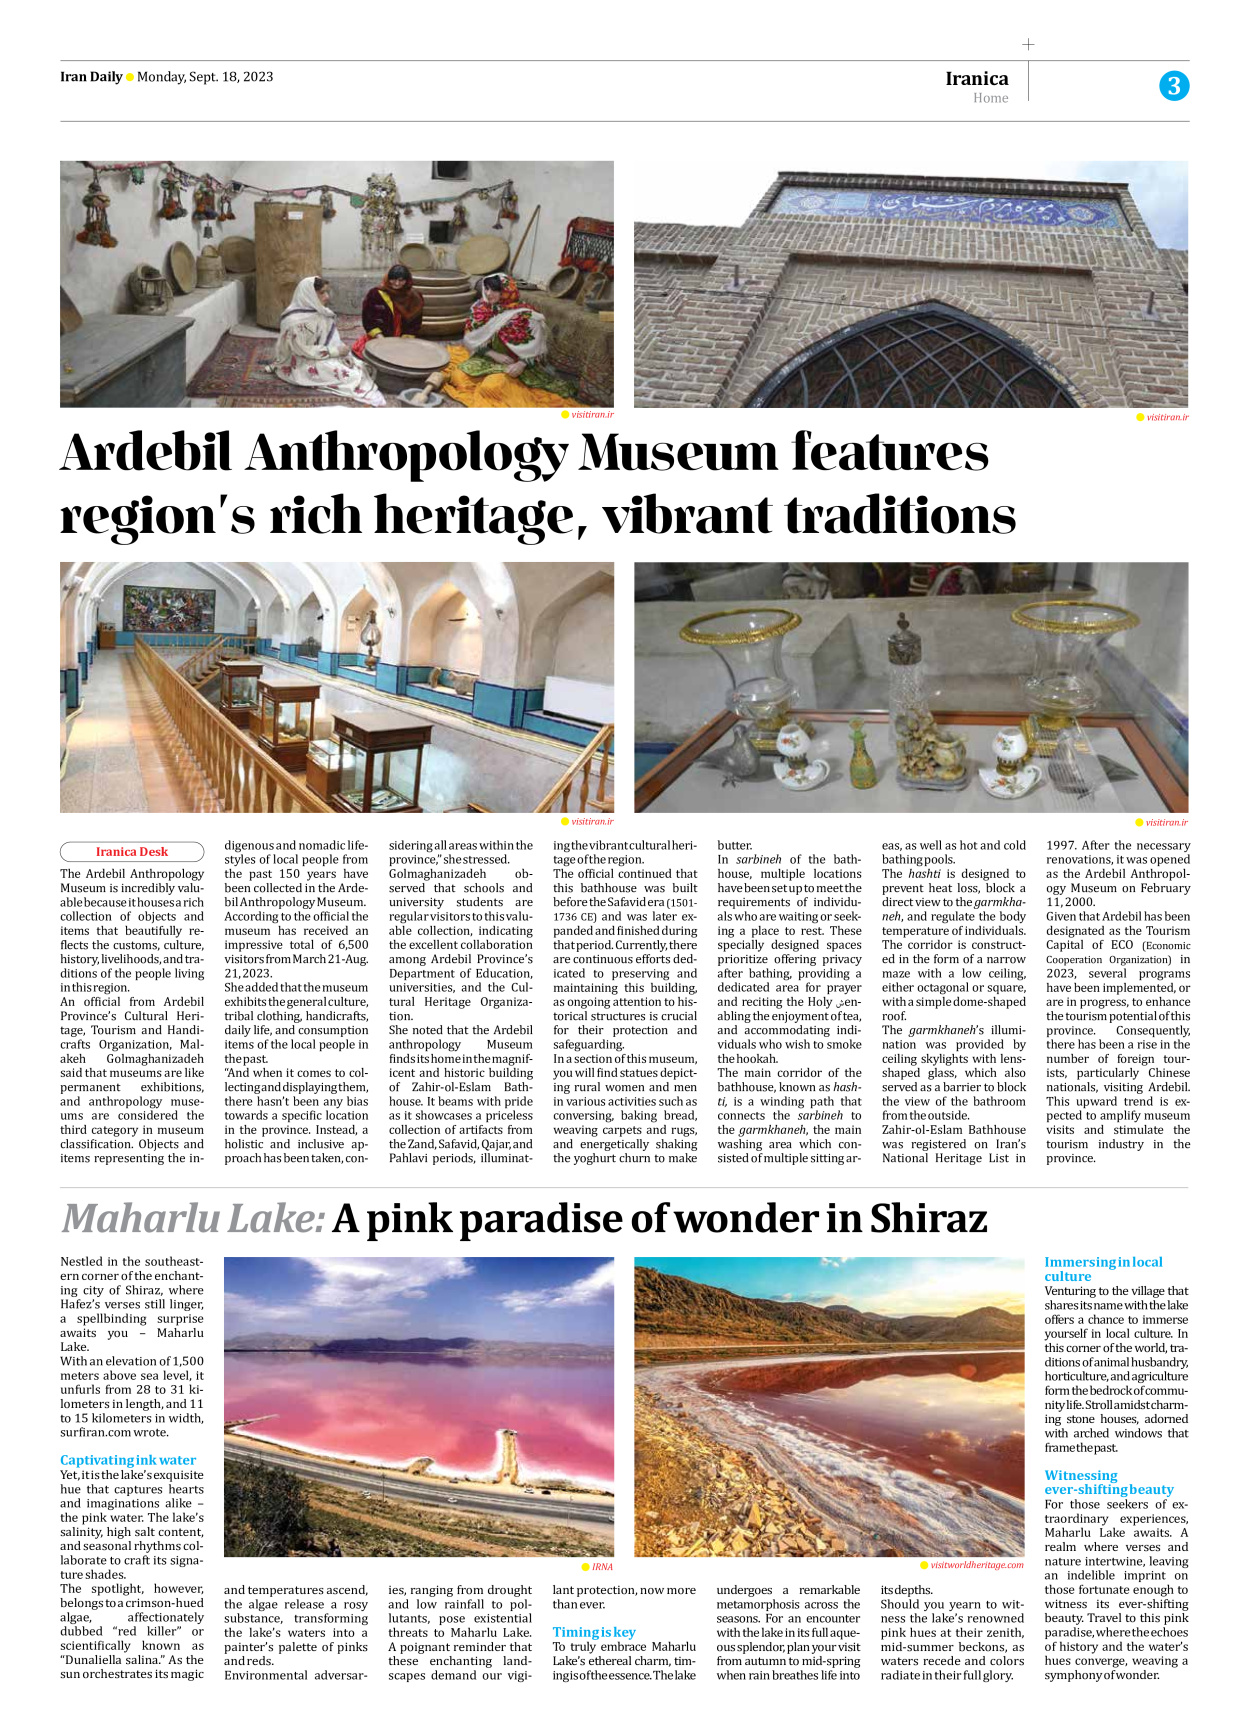 Iran Daily - Number Seven Thousand Three Hundred and Eighty Eight - 18 September 2023 - Page 3